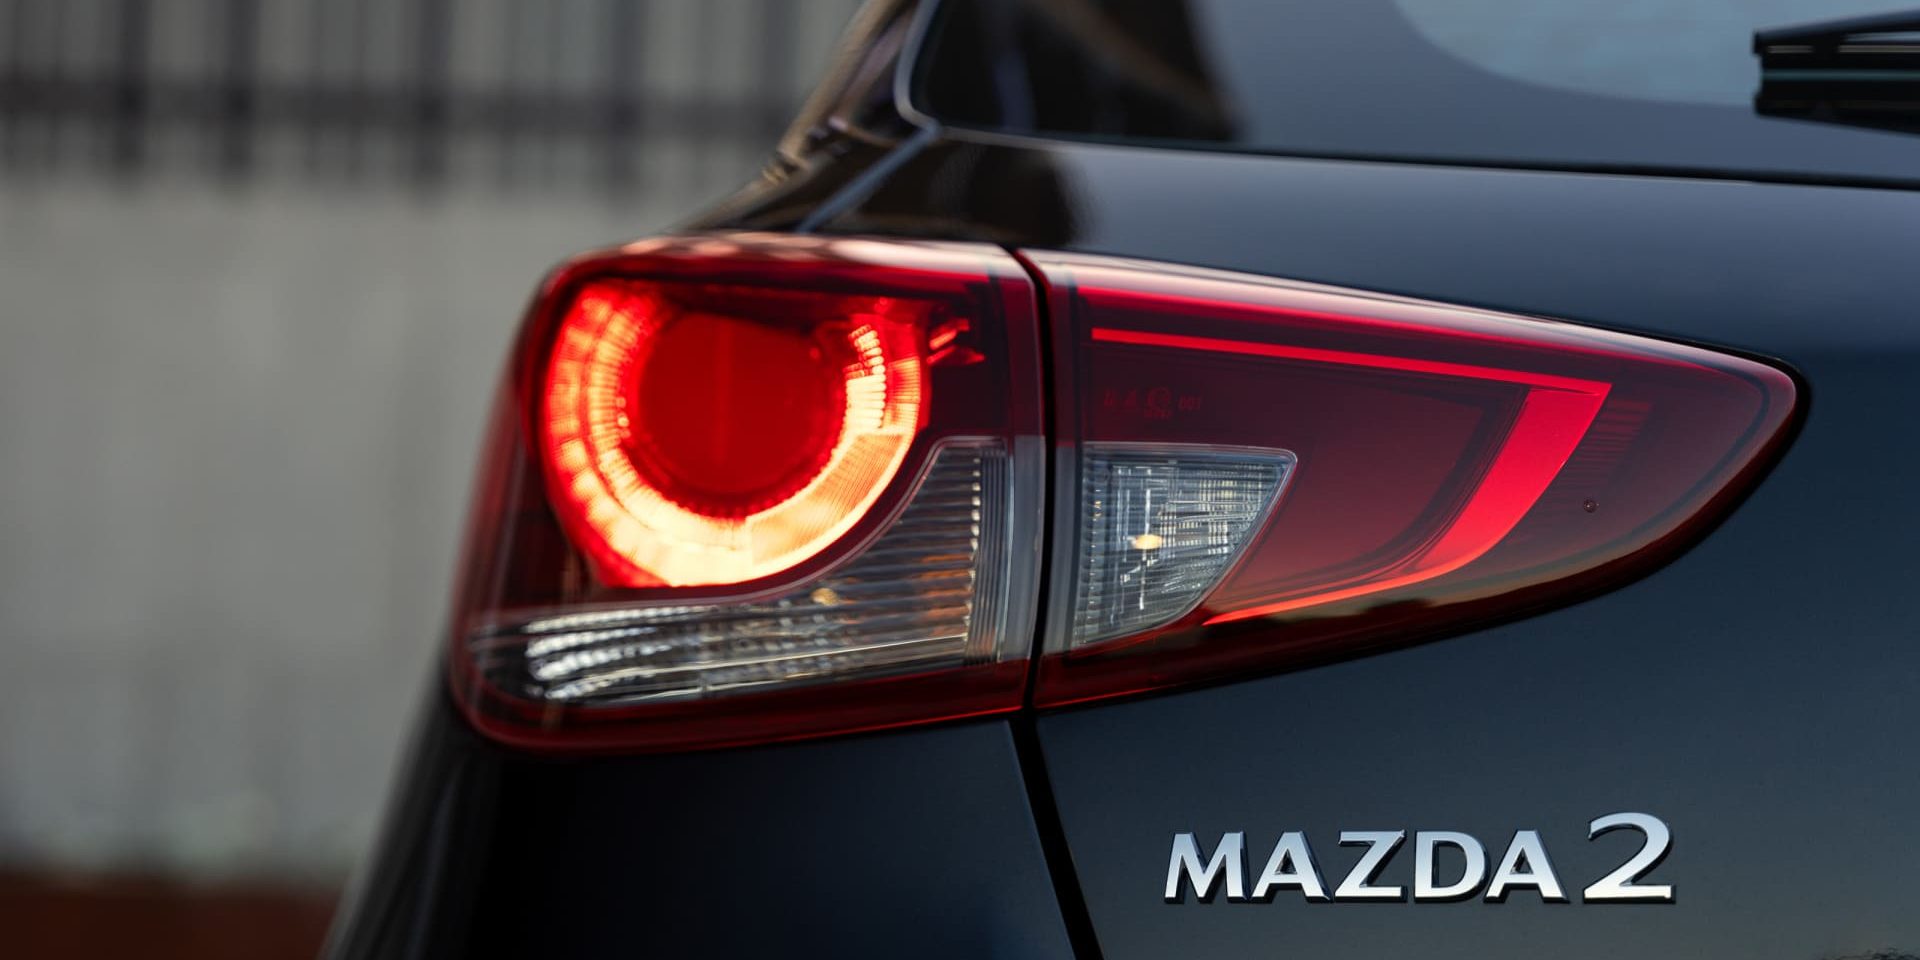 New Mazda 2 may be 12 months away with rotary-engined hybrid tech – report